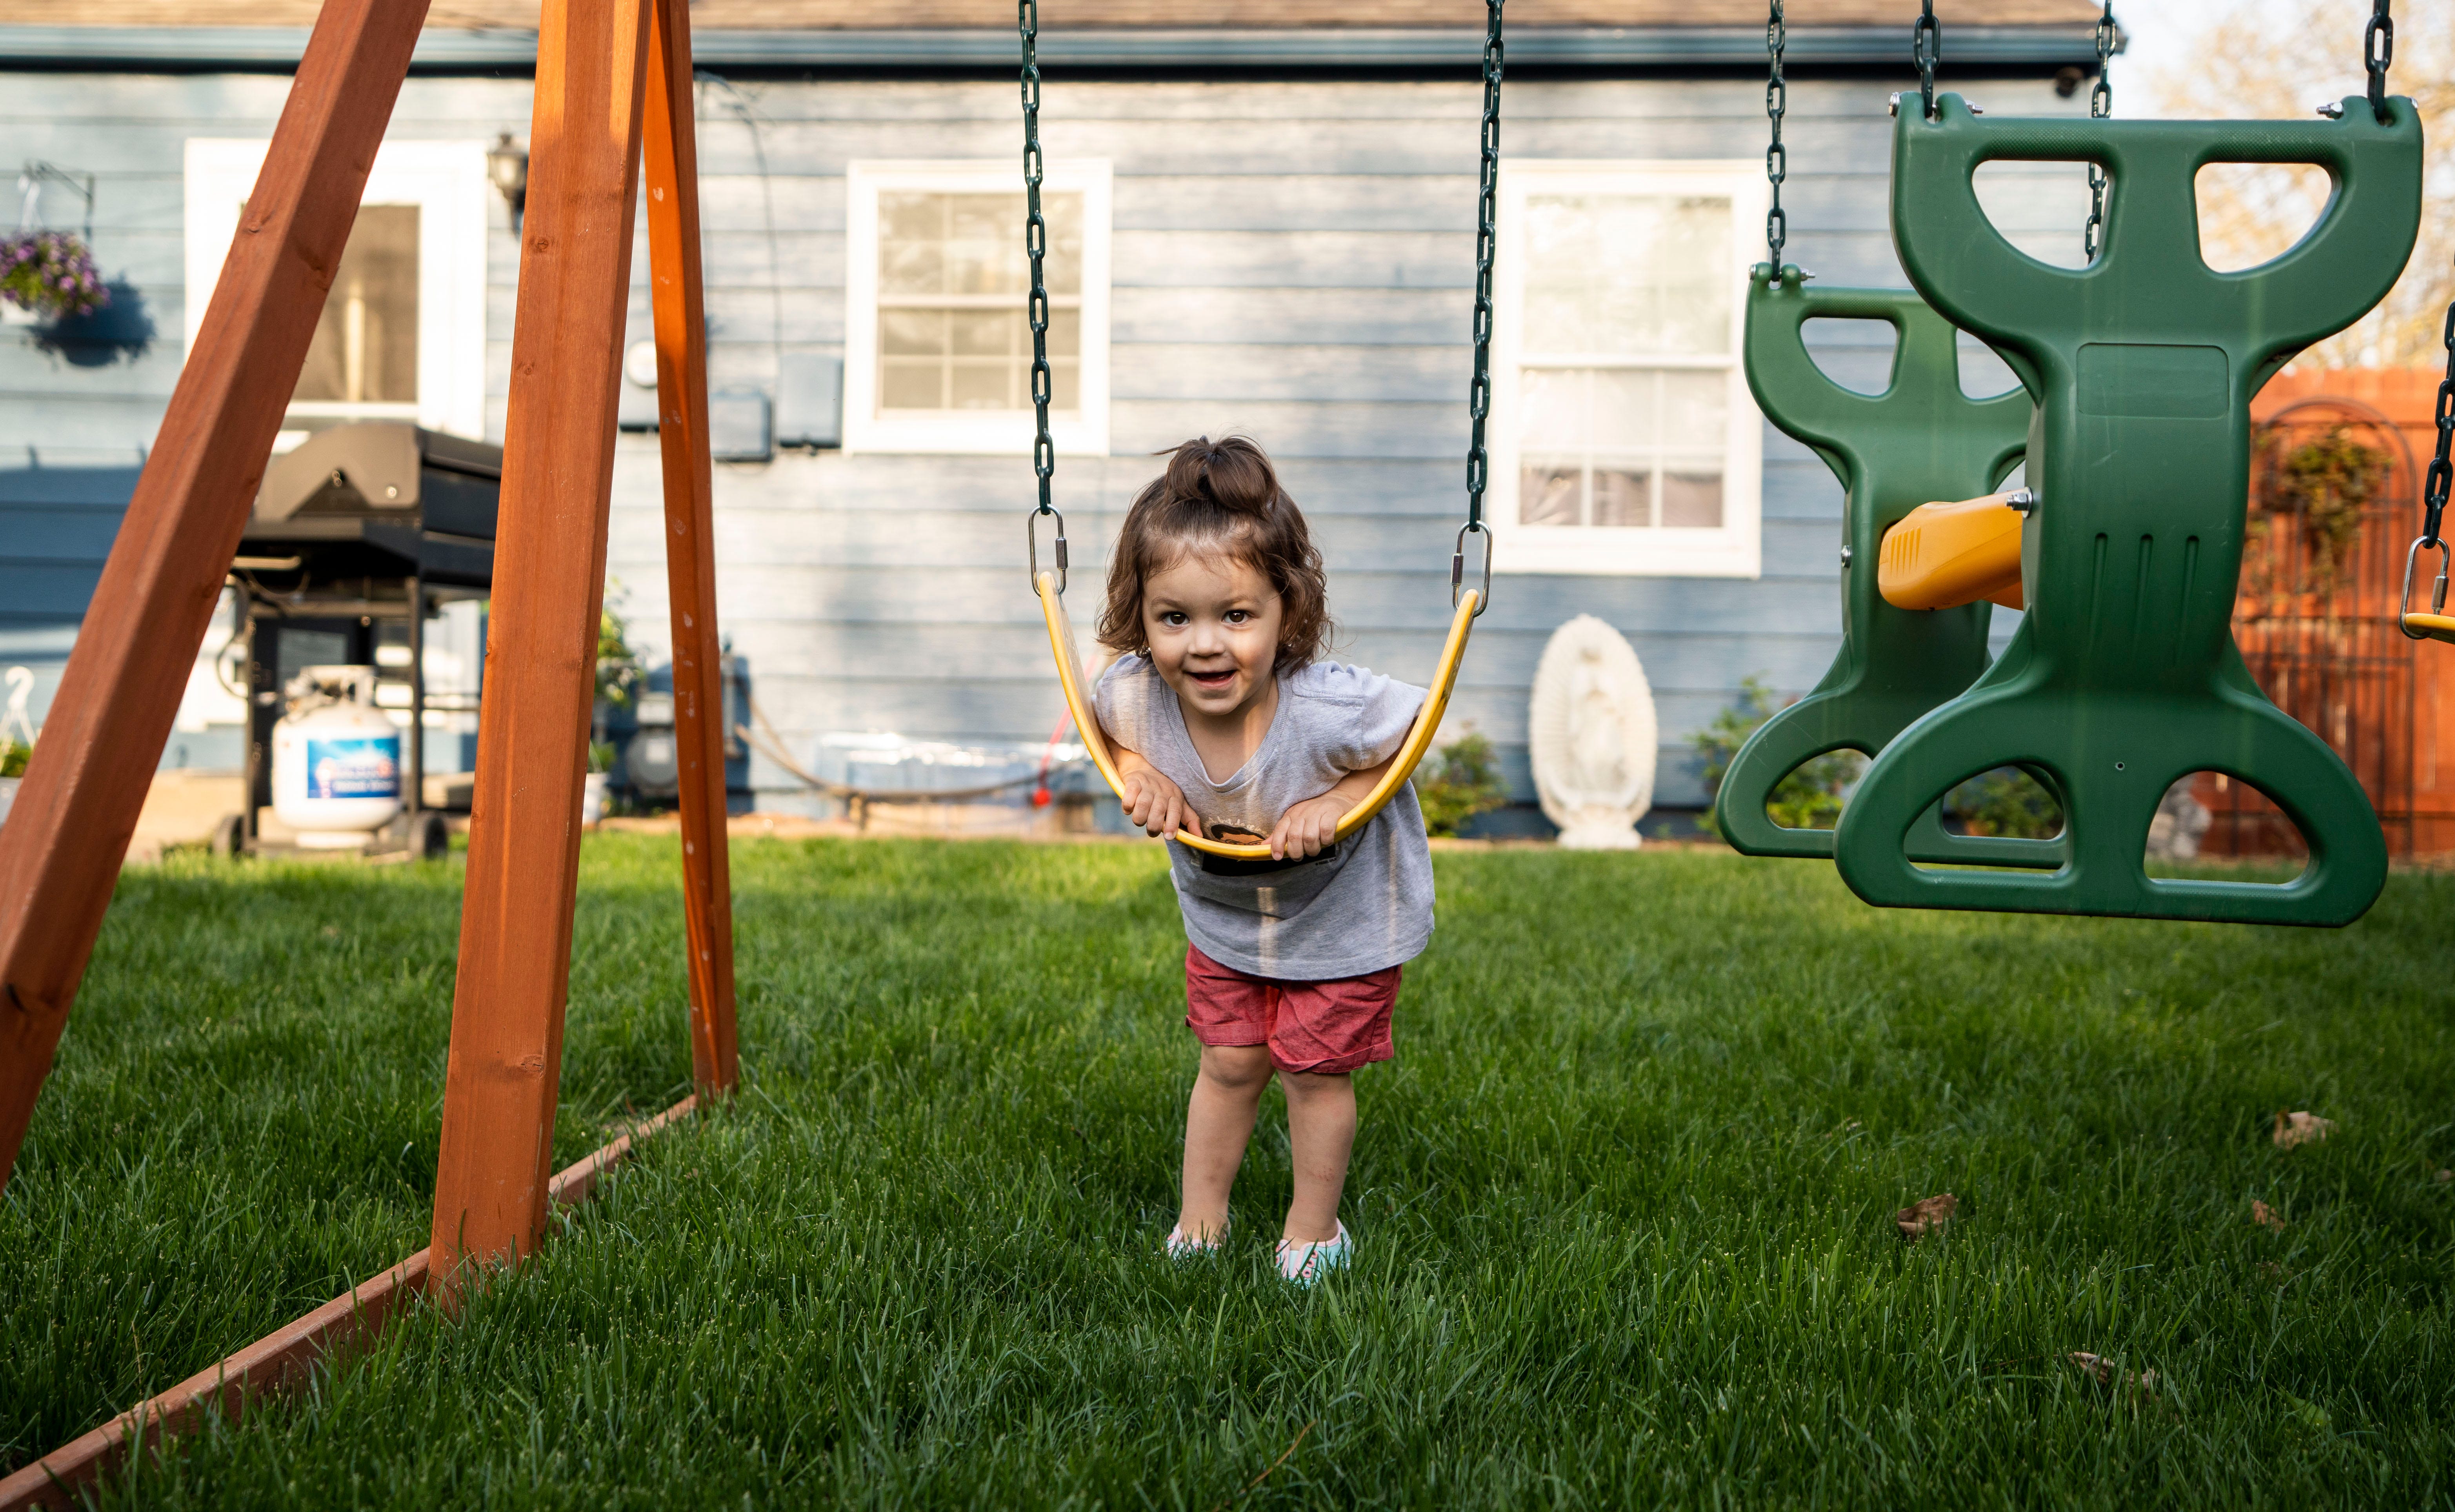 Elvira Grooms, 2, plays in the backyard of her home in Kansas City, Mo., on April 26. Being born during the pandemic has presented challenges for parents who worry about their children’s development.